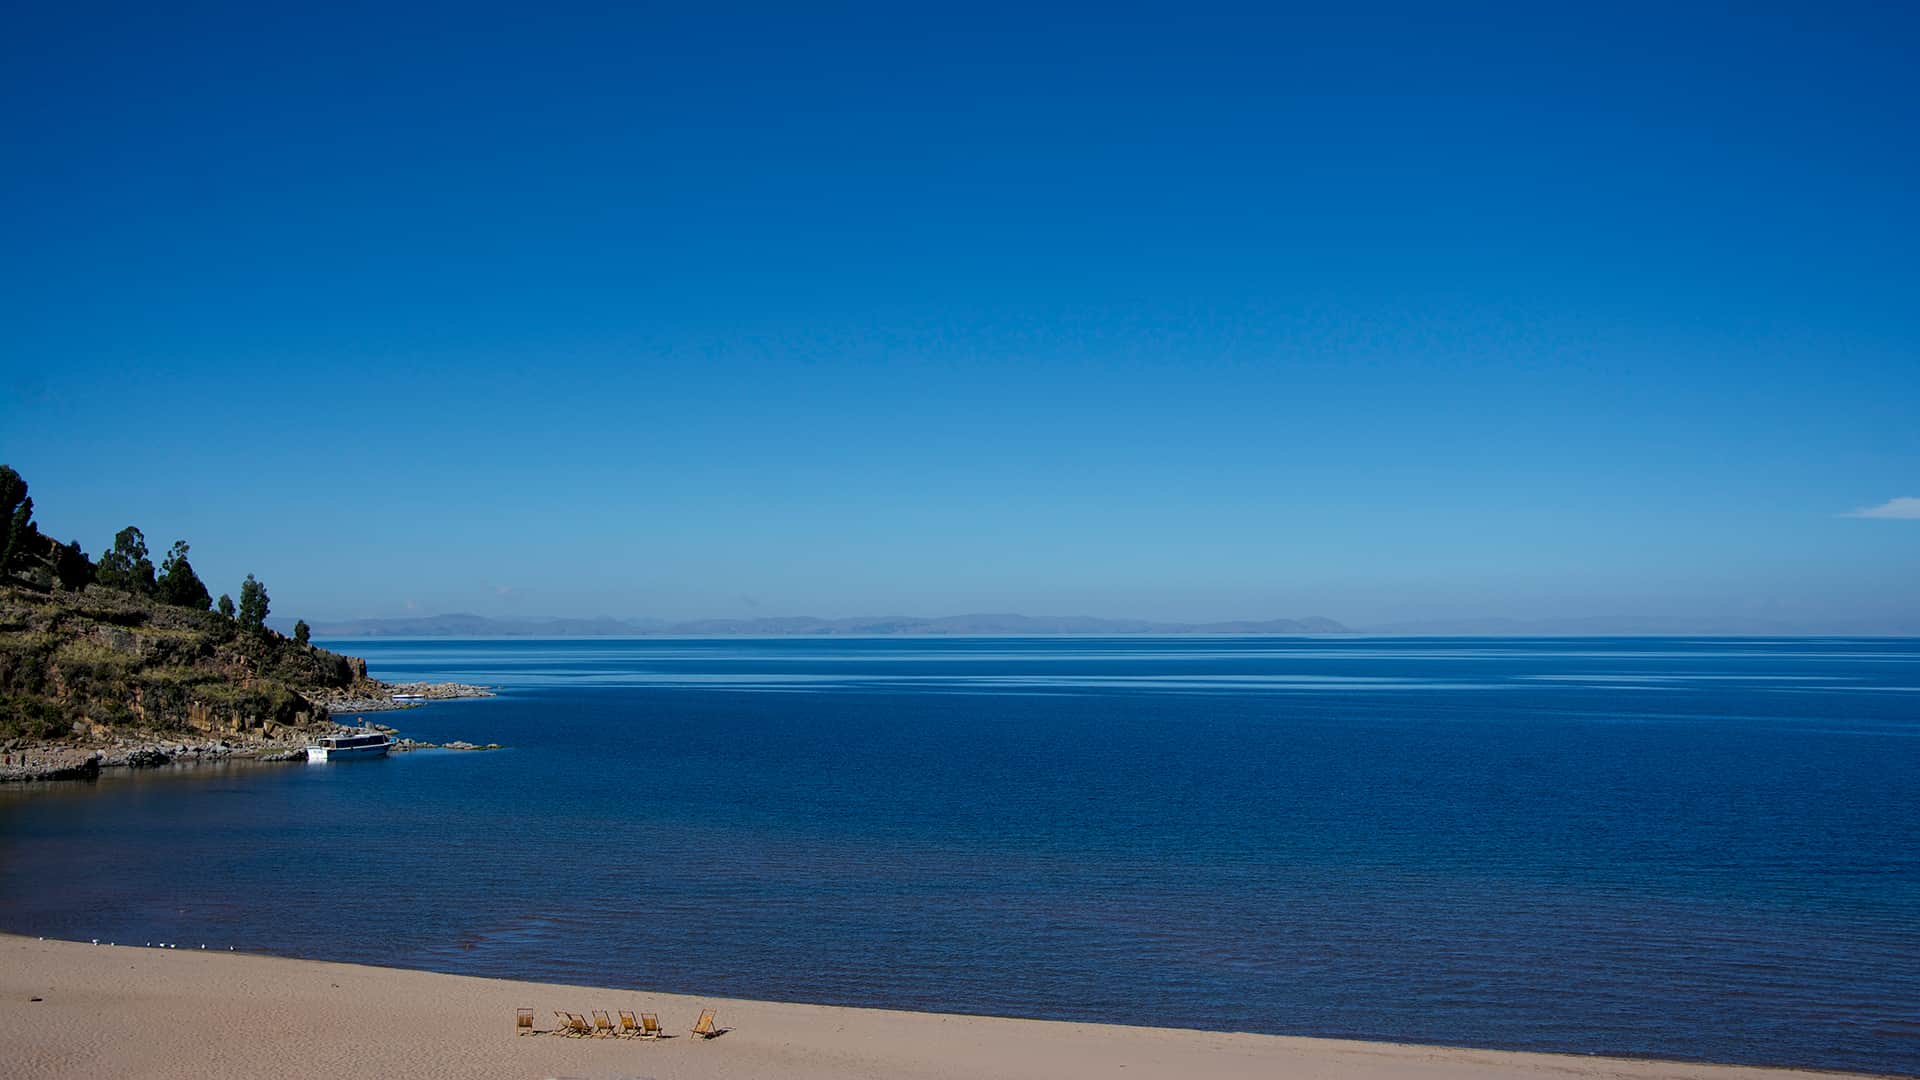 11Blue sky and blue water all over, only a small beach line and tiny beach chairs visible | Responsible Travel Peru